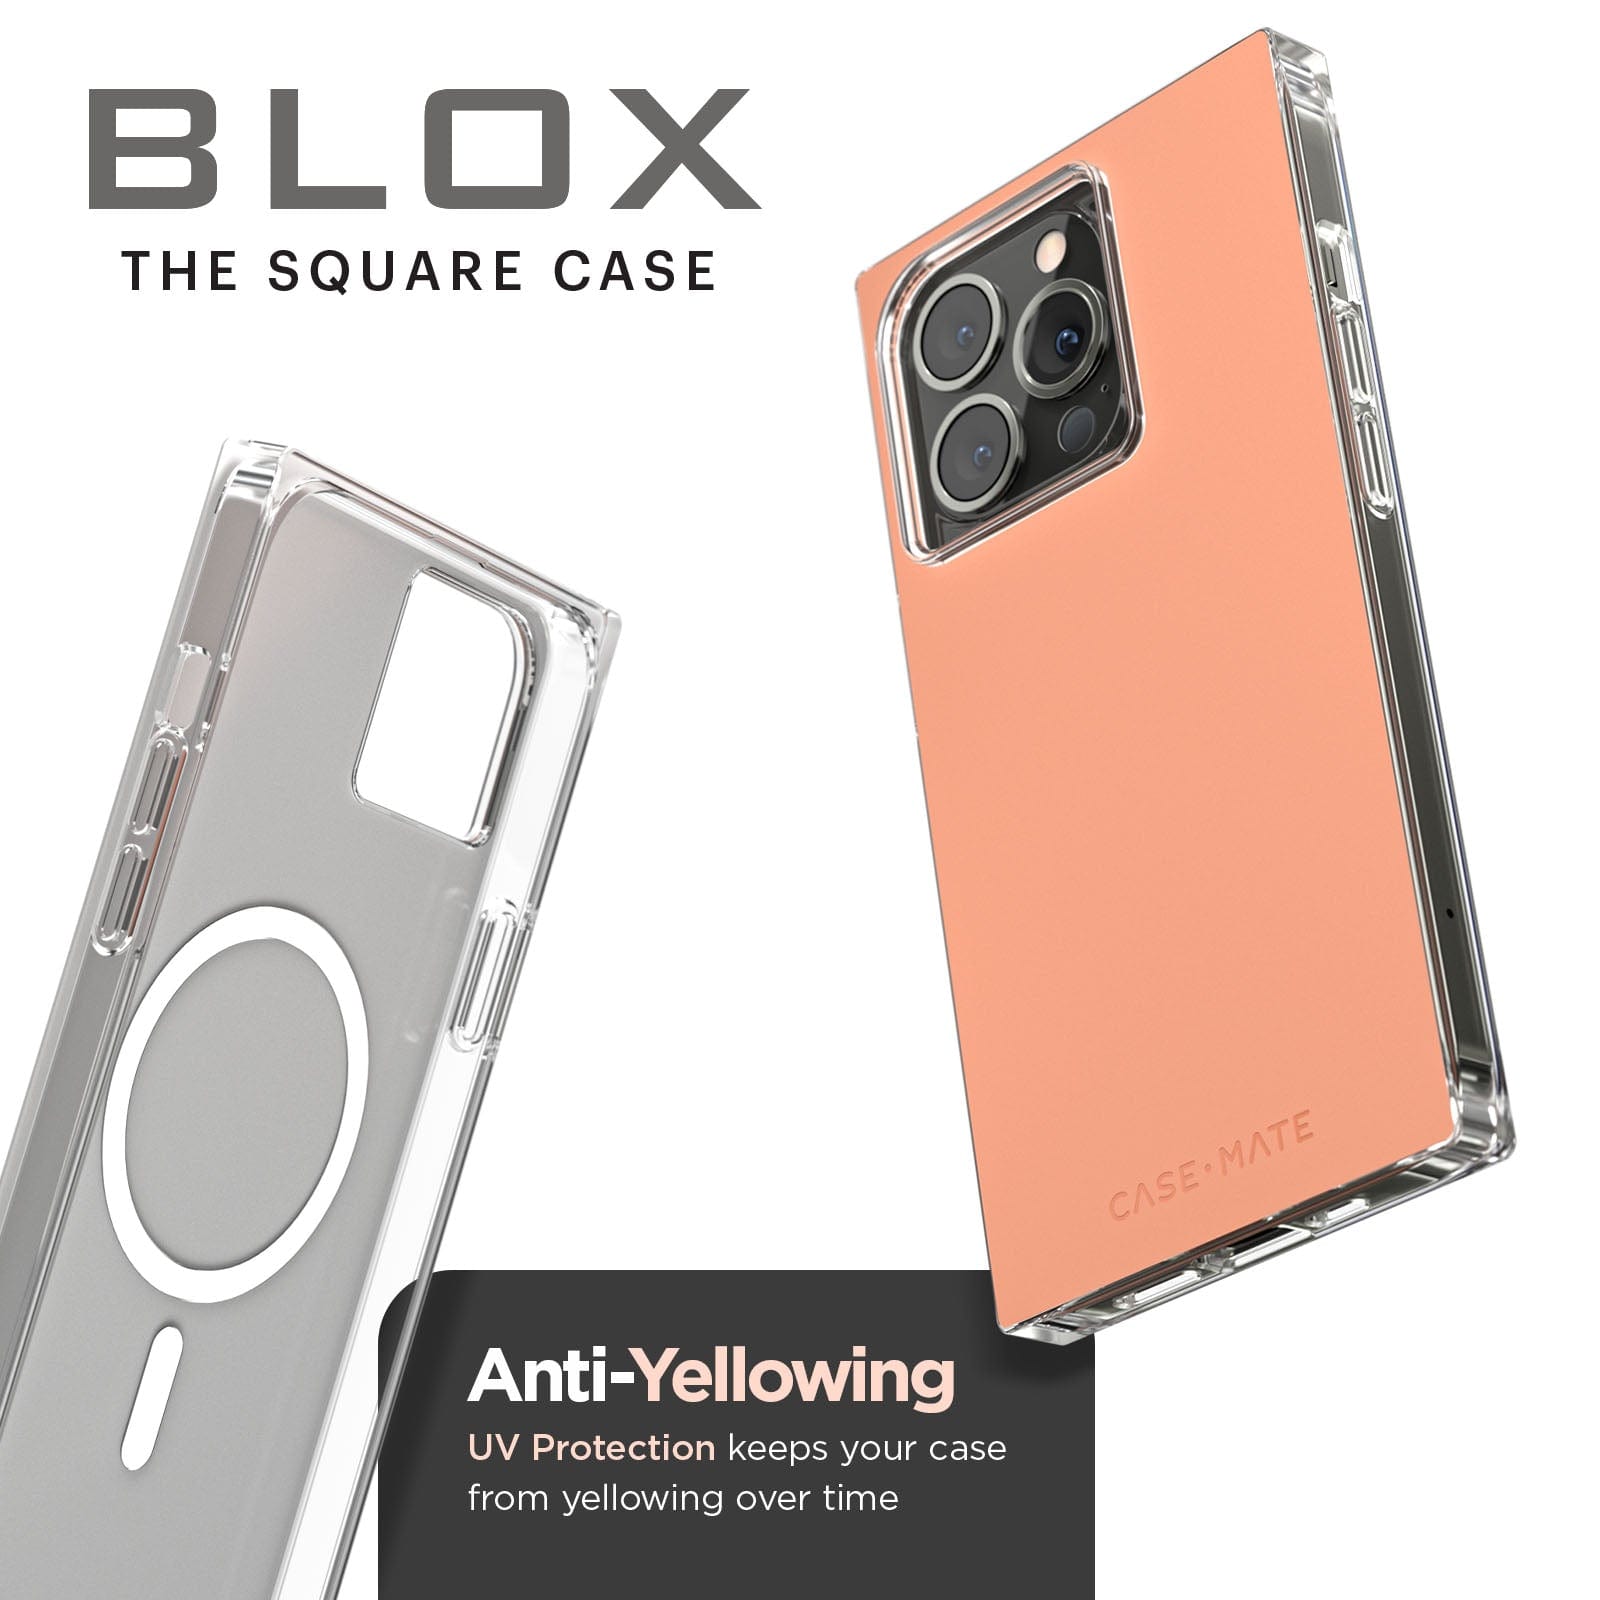 BLOX The Square Case. Anti-yellowing UV protection keeps your case from yellowing over time. color::Clay Pink